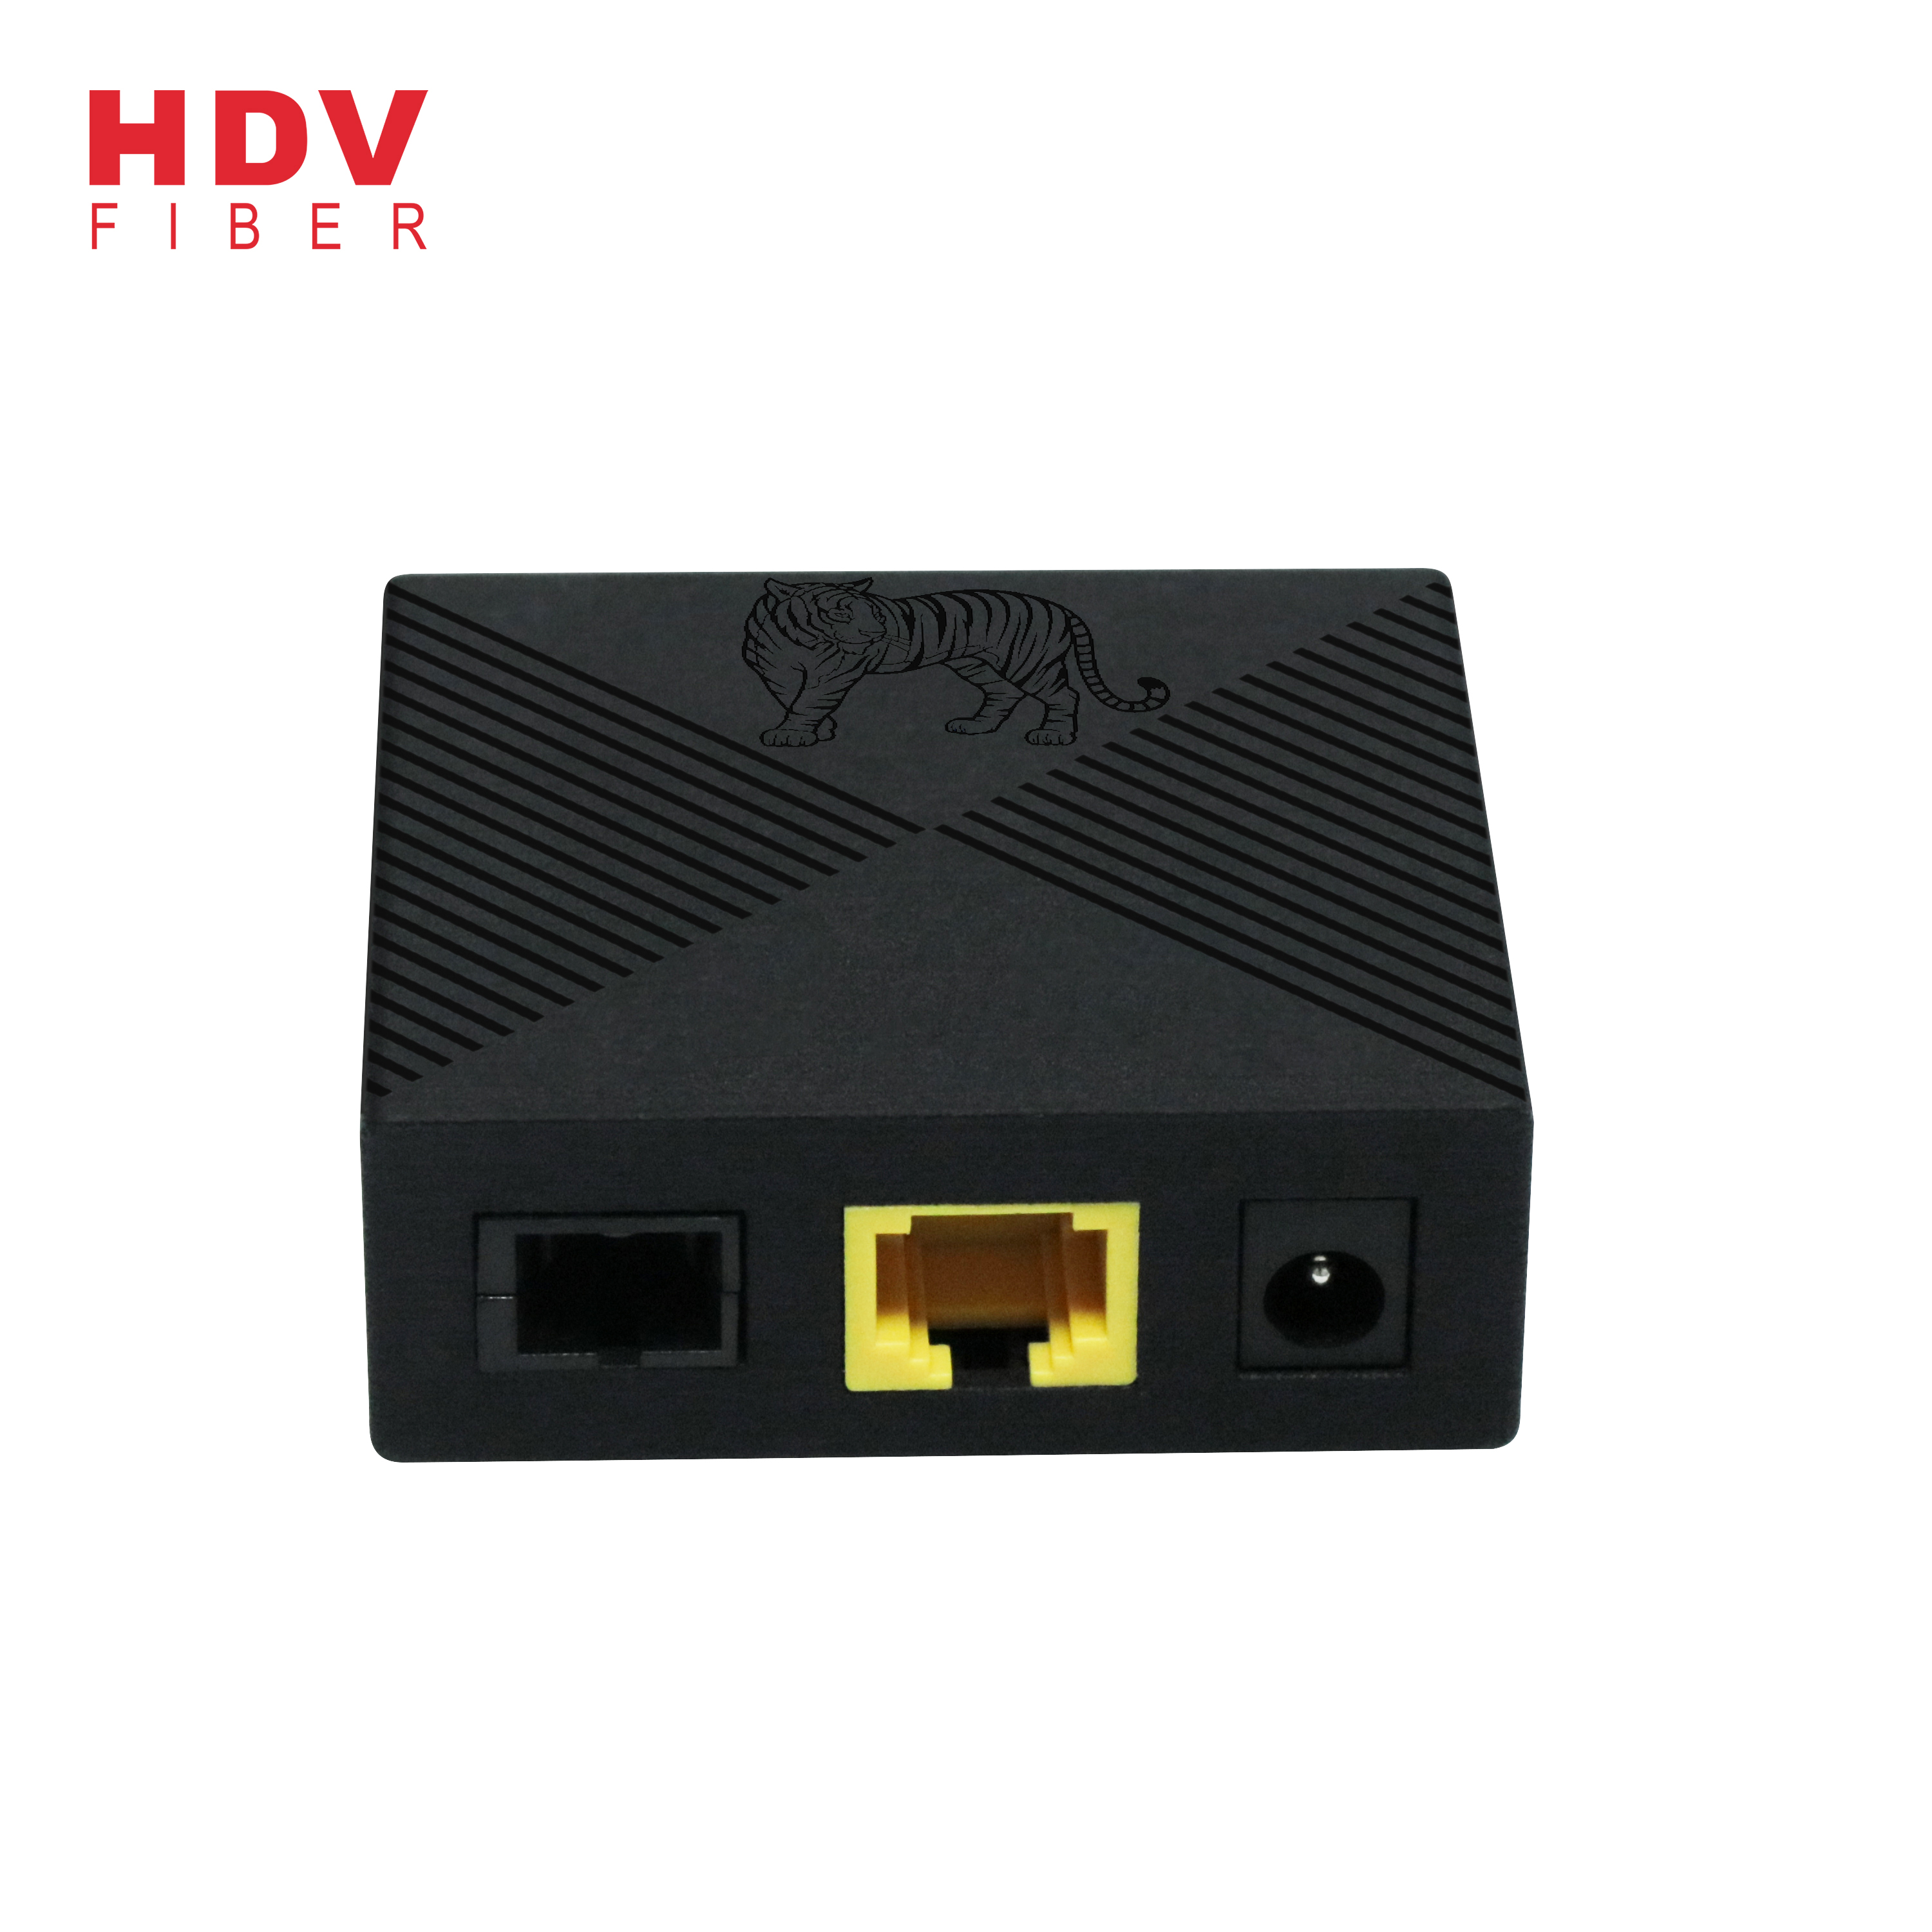 Trending Products Single Mode Module – Factory sales ftth onu Very Low Price Compatible Bdcom ZTE Huawei Gpon Onu – HDV